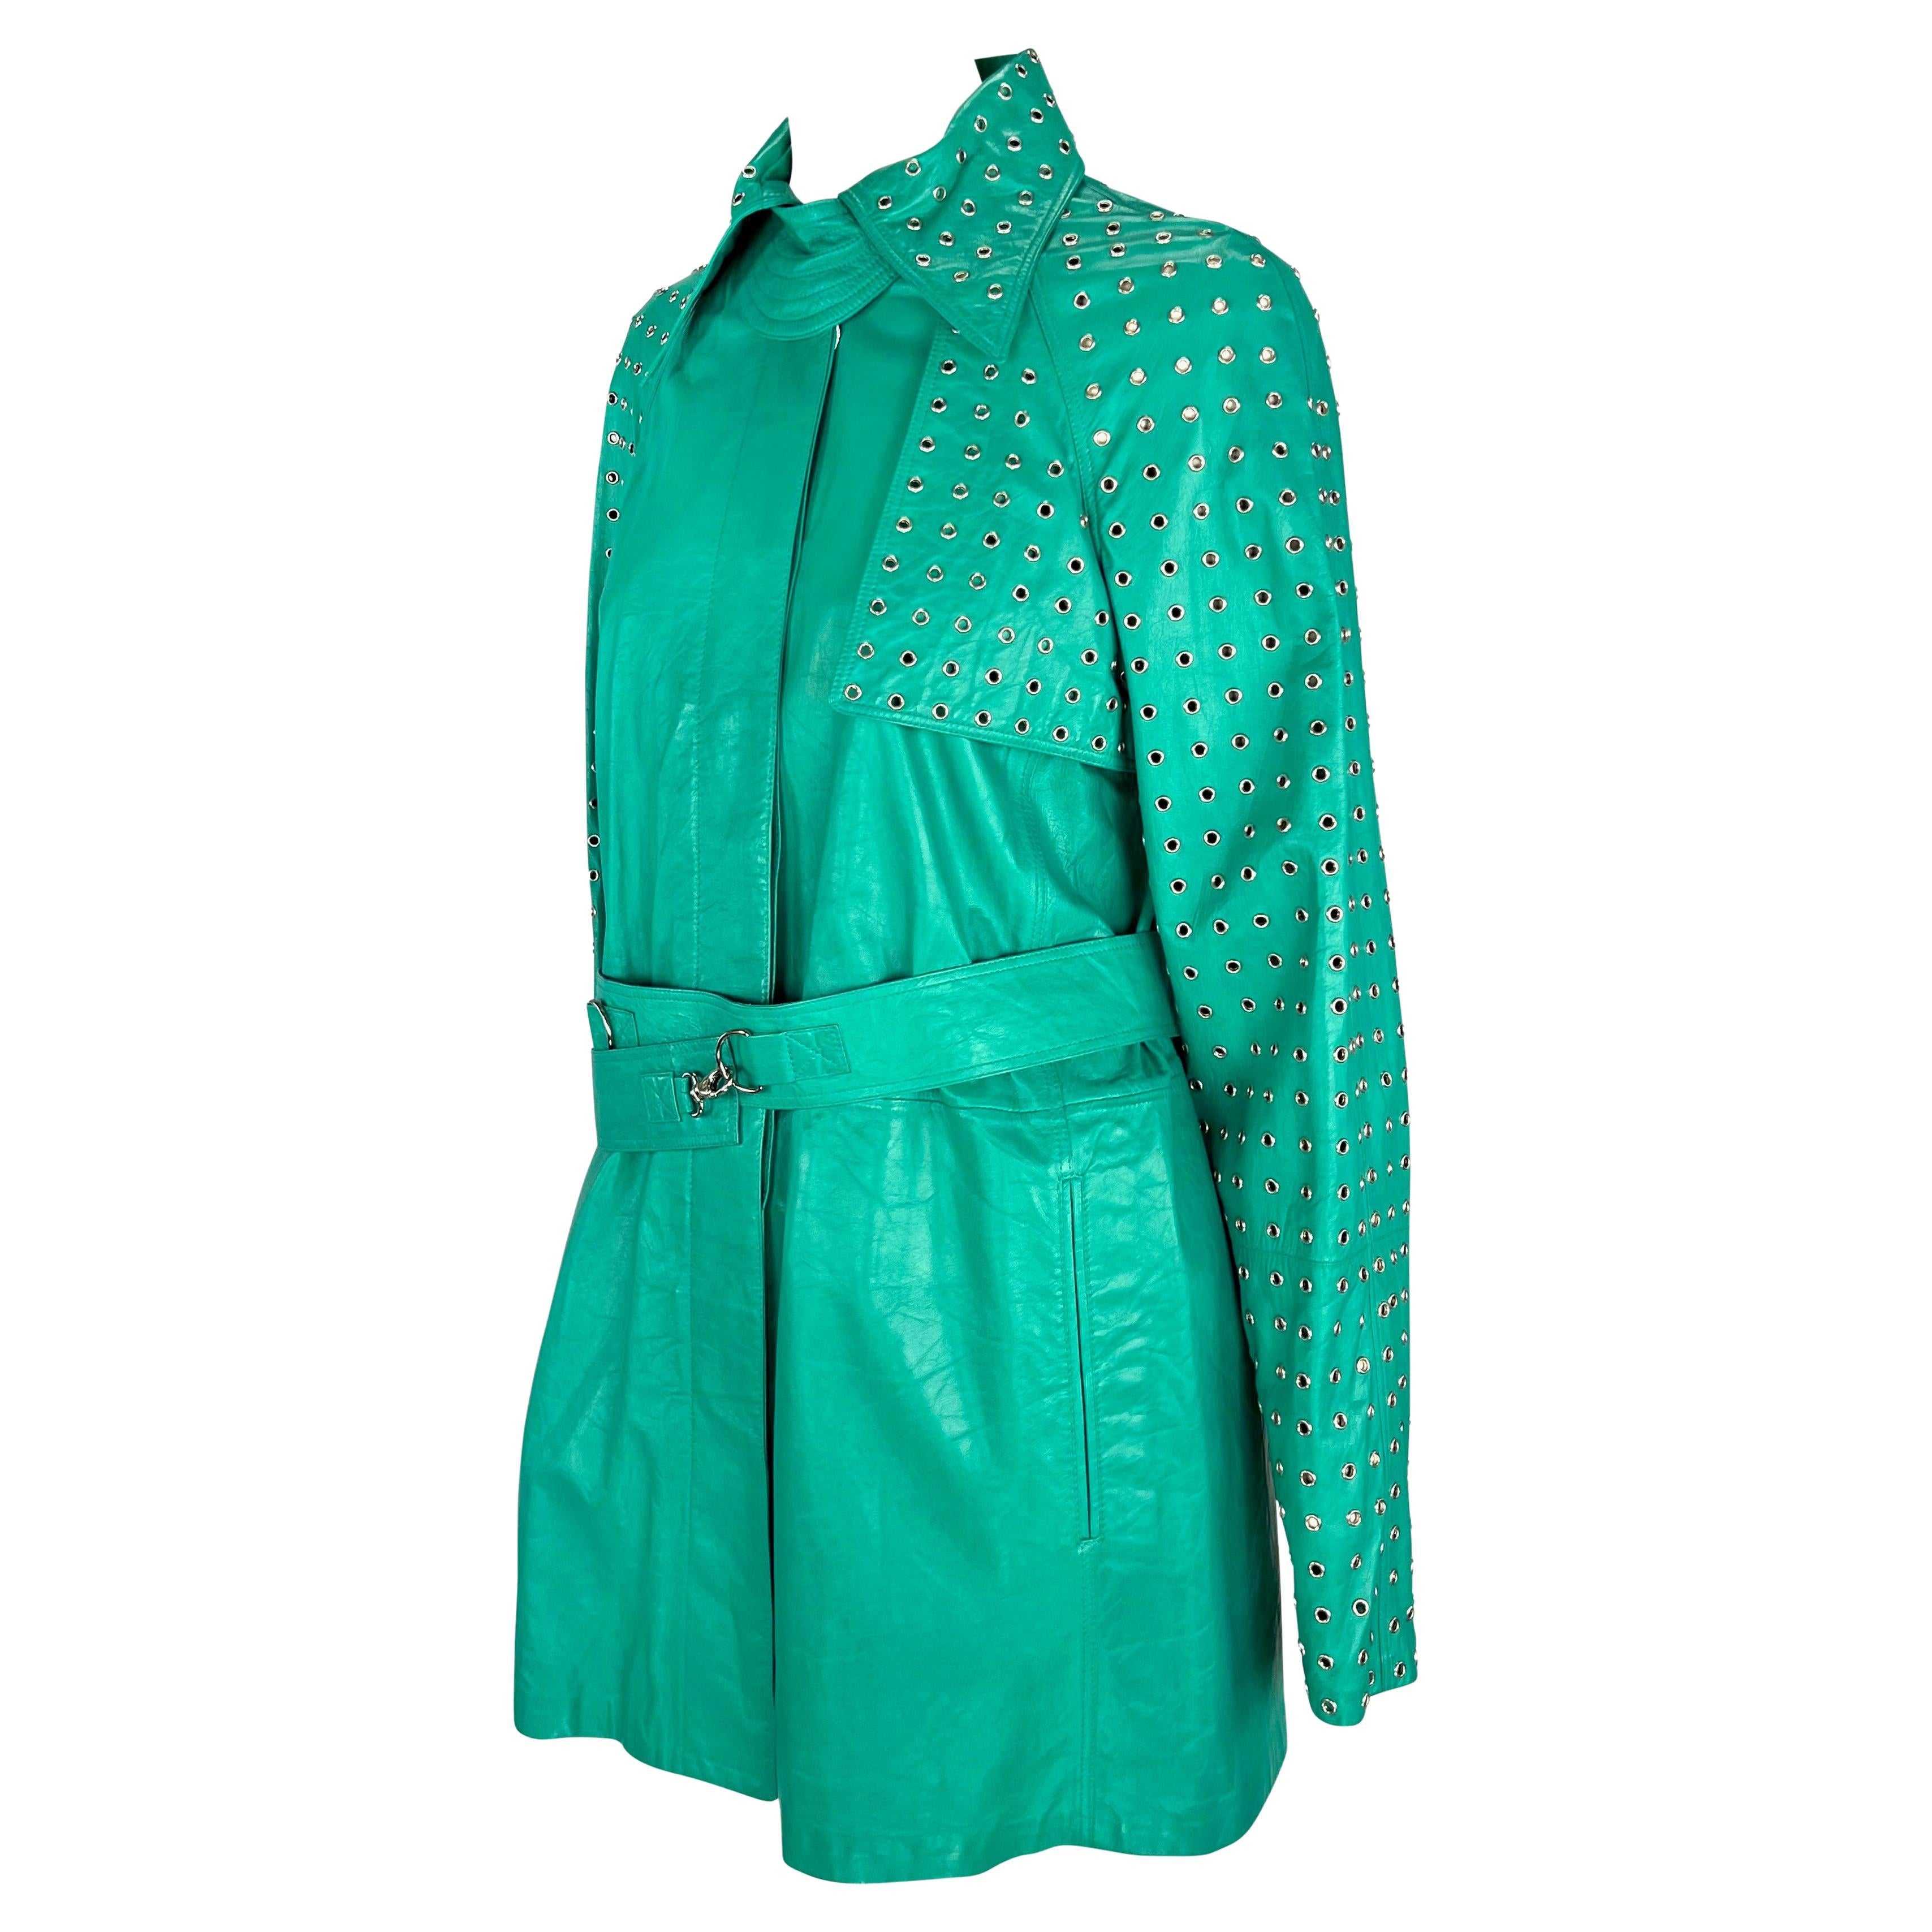 NWT S/S 2003 Gianni Versace by Donatella Versace Teal Rivet Leather Jacket In Excellent Condition For Sale In West Hollywood, CA